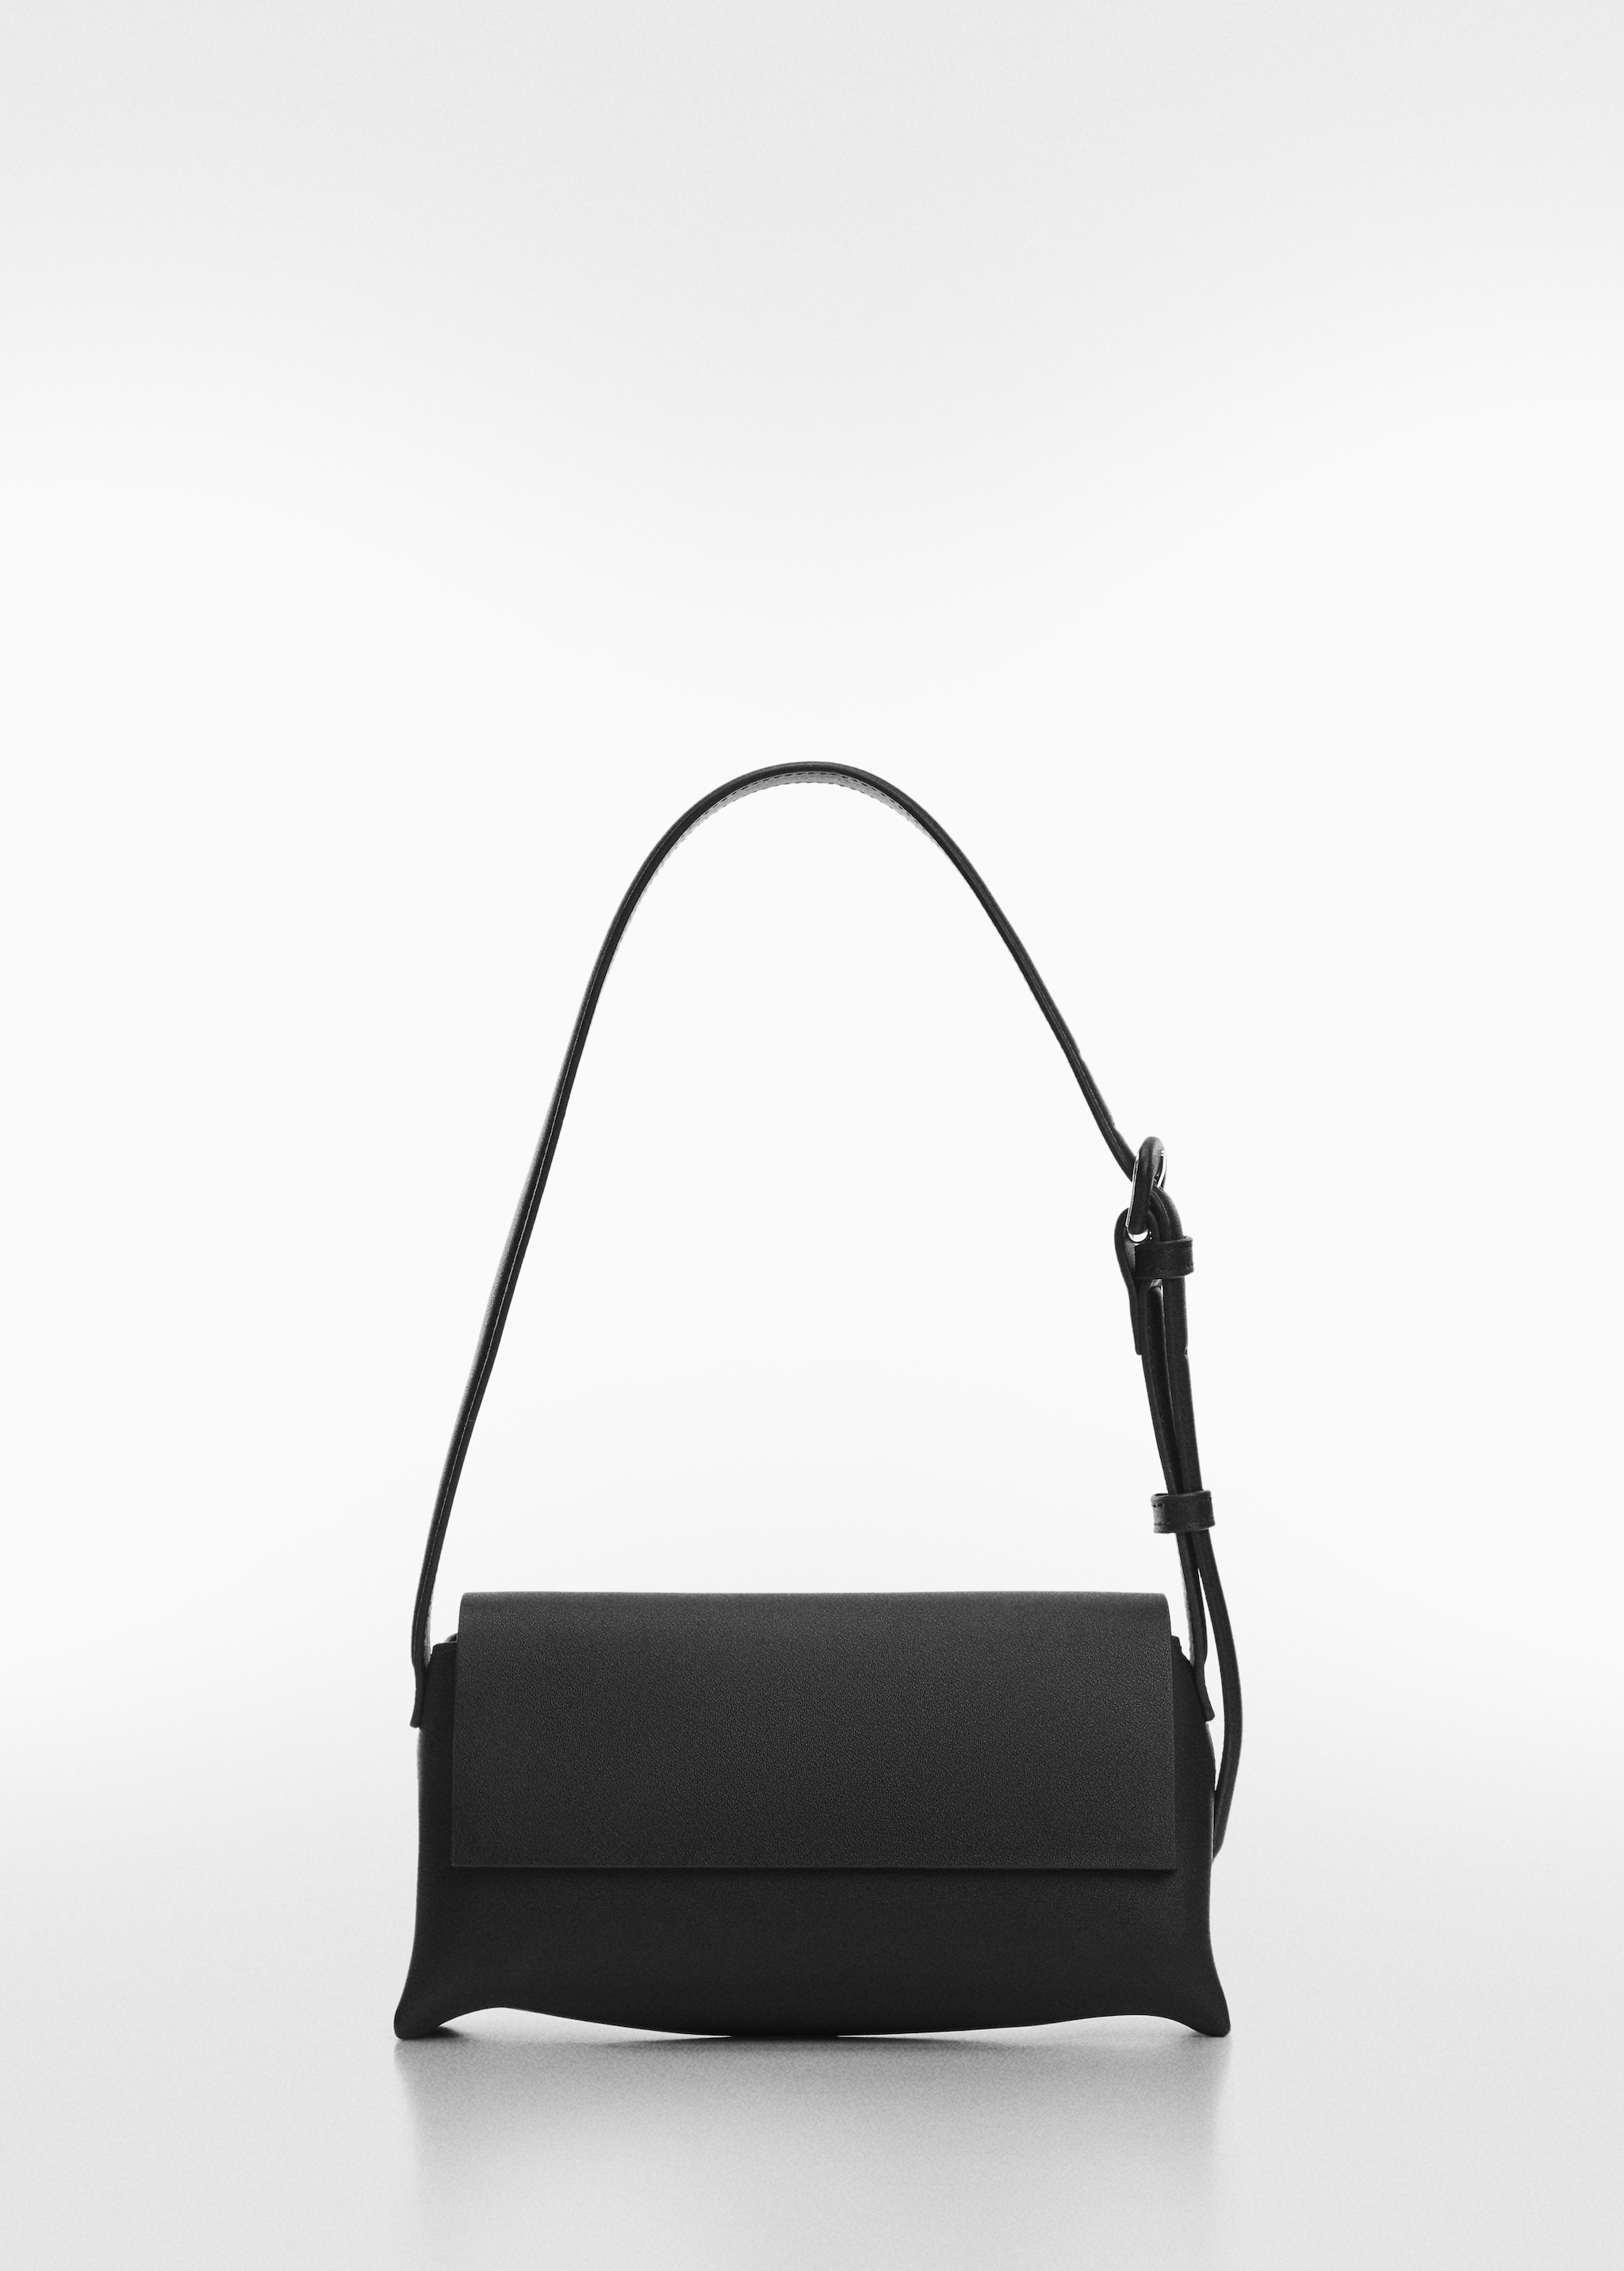 Shoulder bag with strap - Article without model